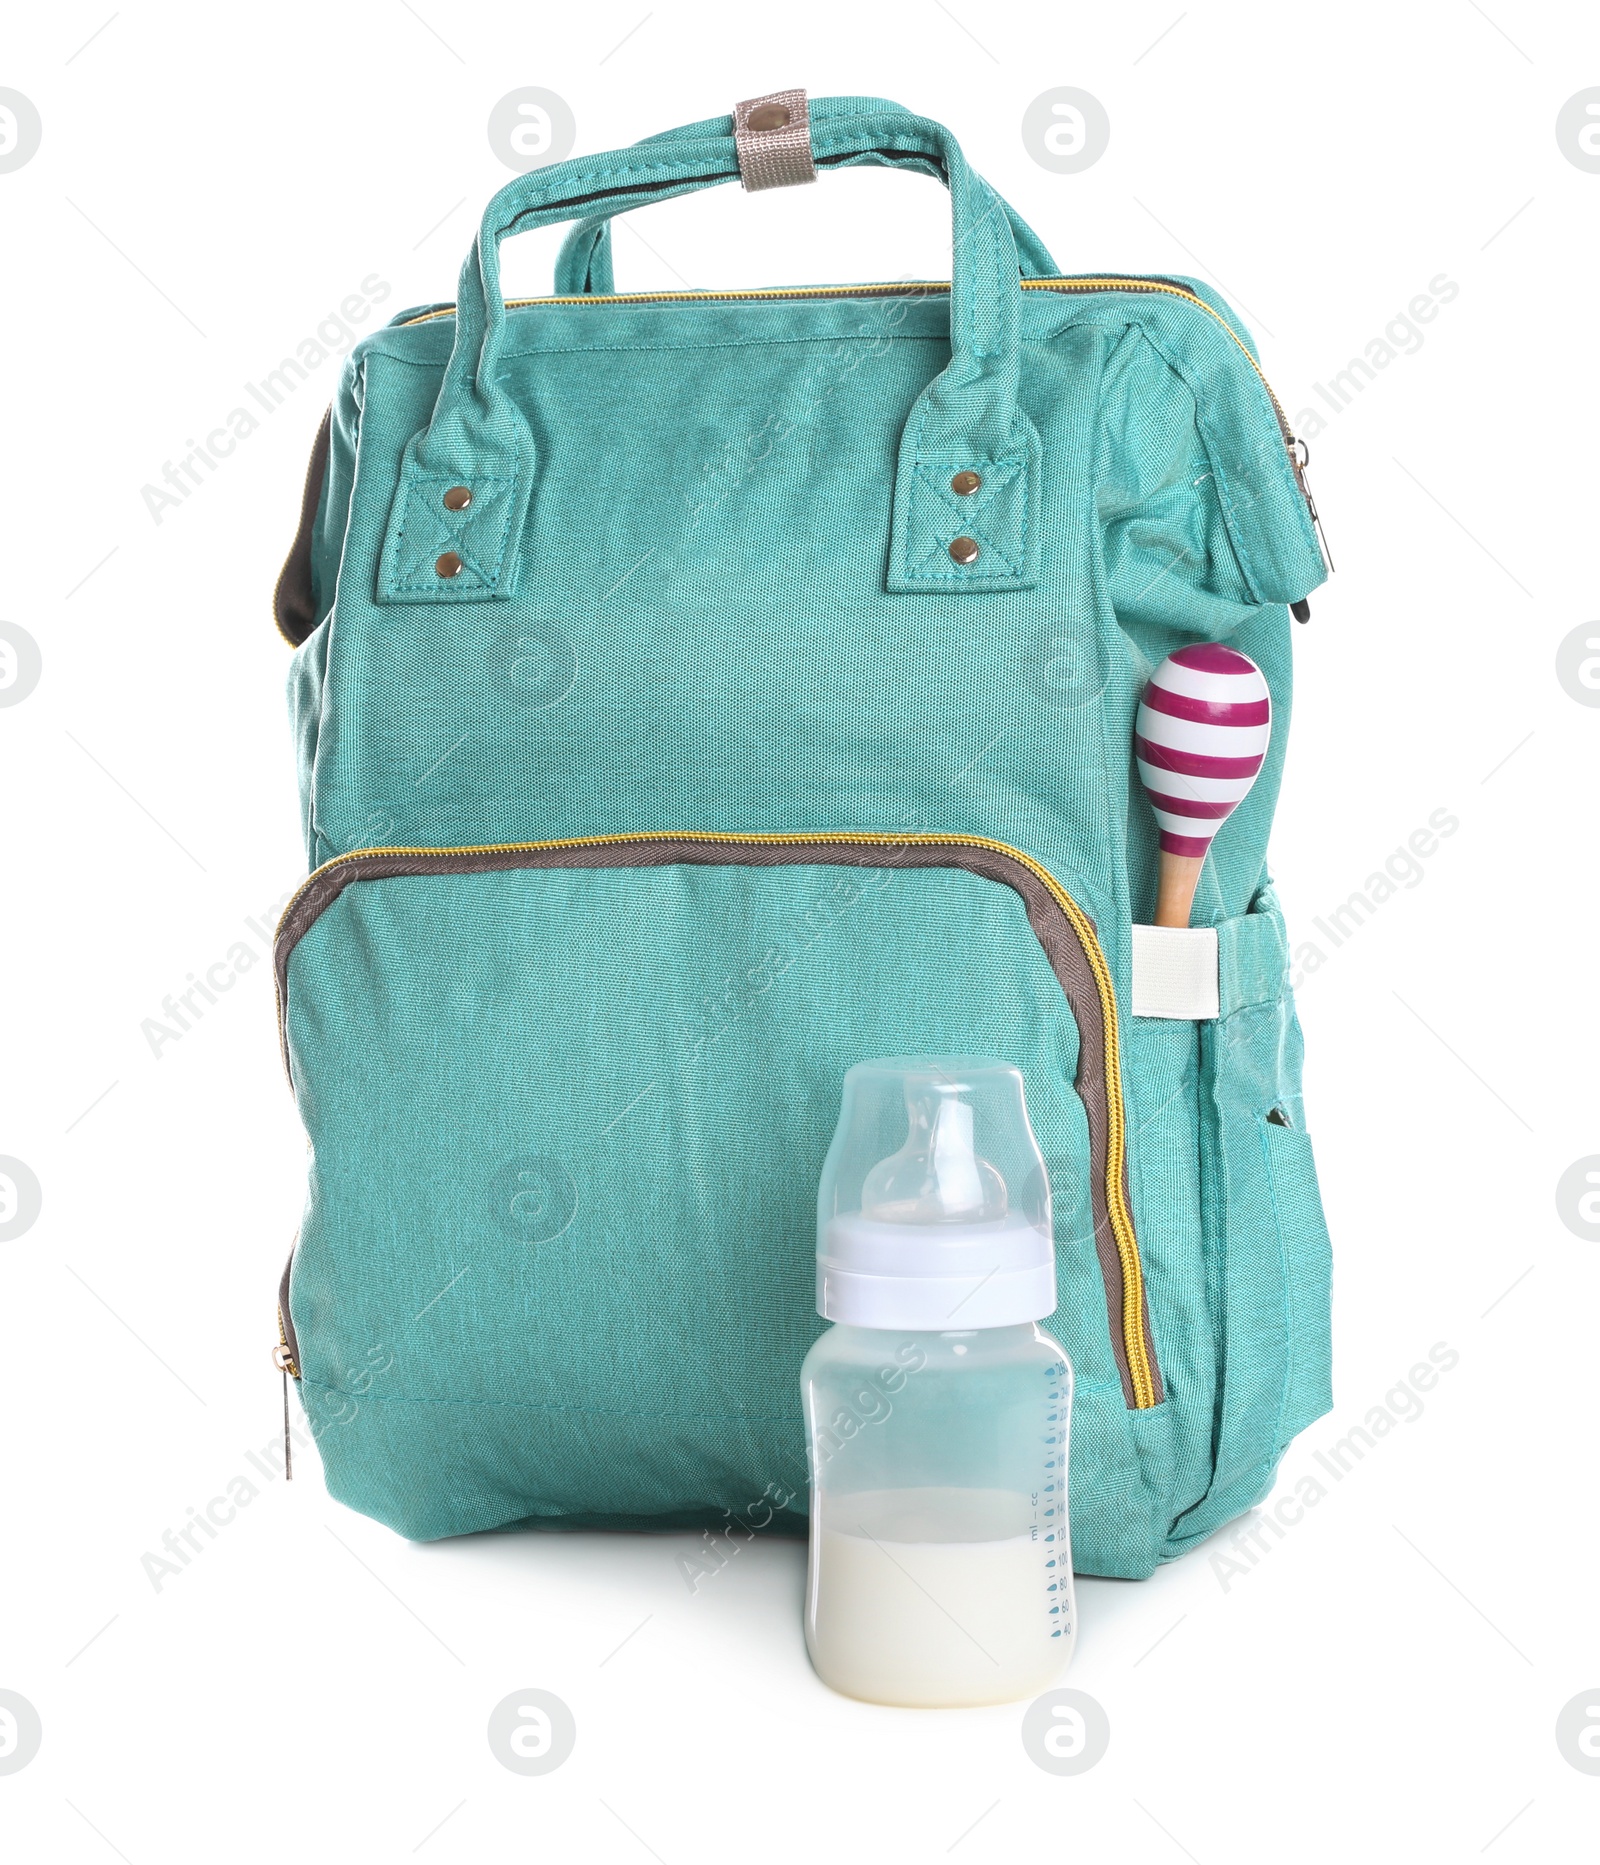 Photo of Maternity backpack with baby accessories on white background